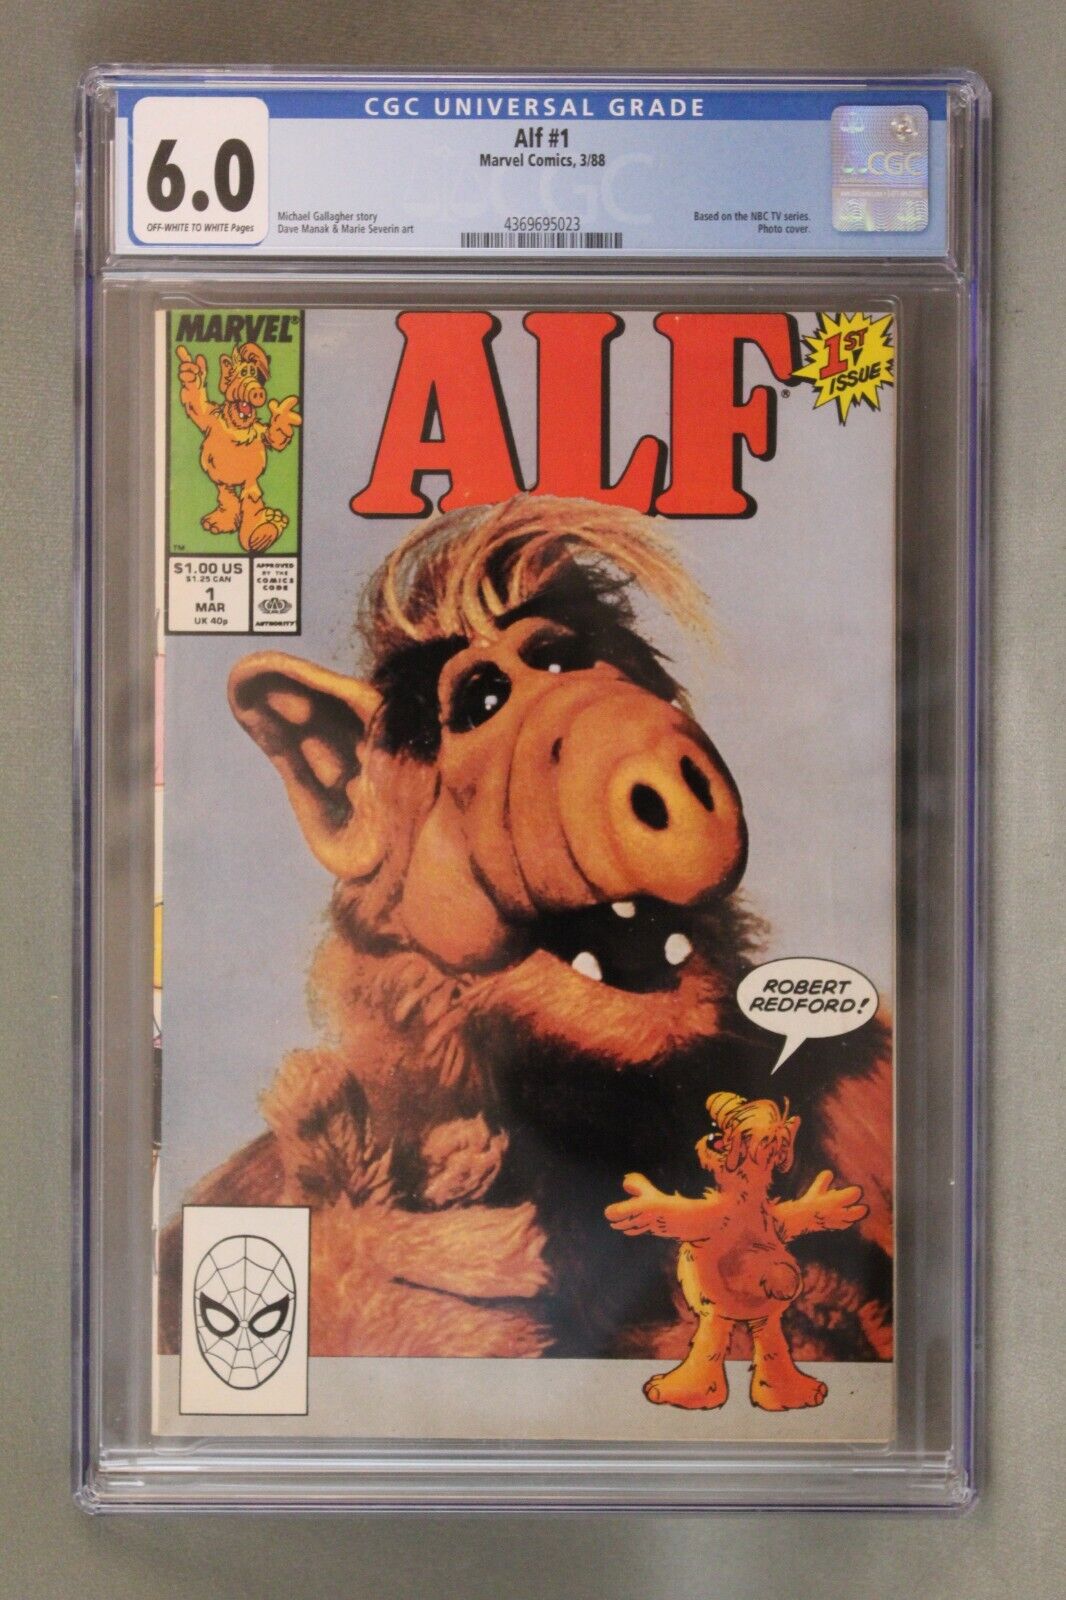 ALF #1 *3/1988* CGC UNIVERSAL GRADE  6.0 Off-White to White Pages, Marvel Comics